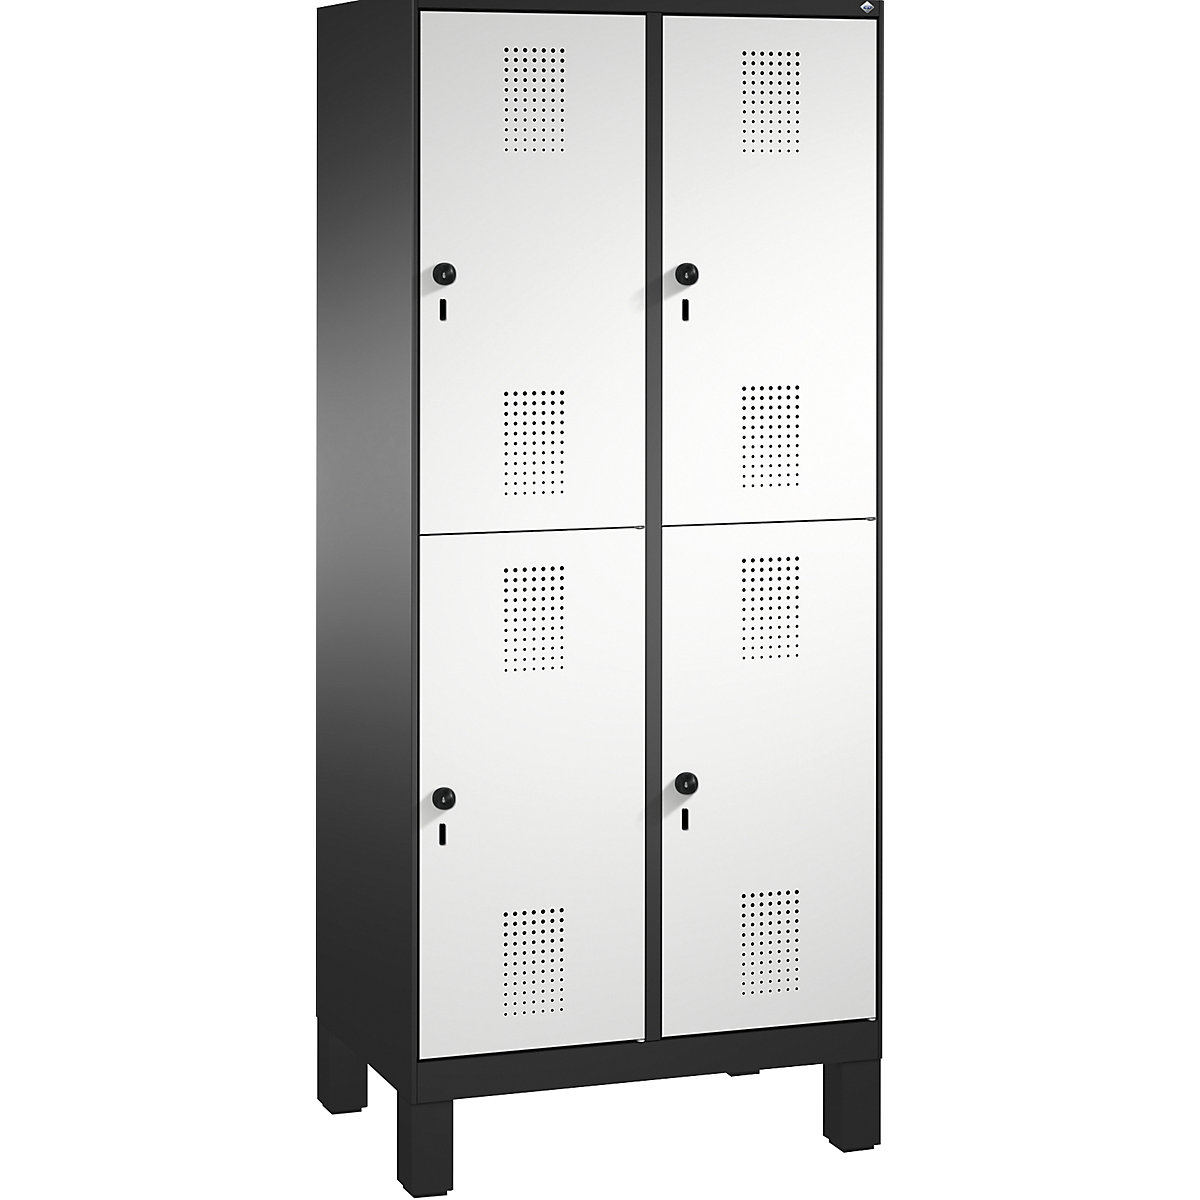 EVOLO cloakroom locker, double tier, with feet – C+P, 2 compartments, 2 shelf compartments each, compartment width 400 mm, black grey / light grey-9